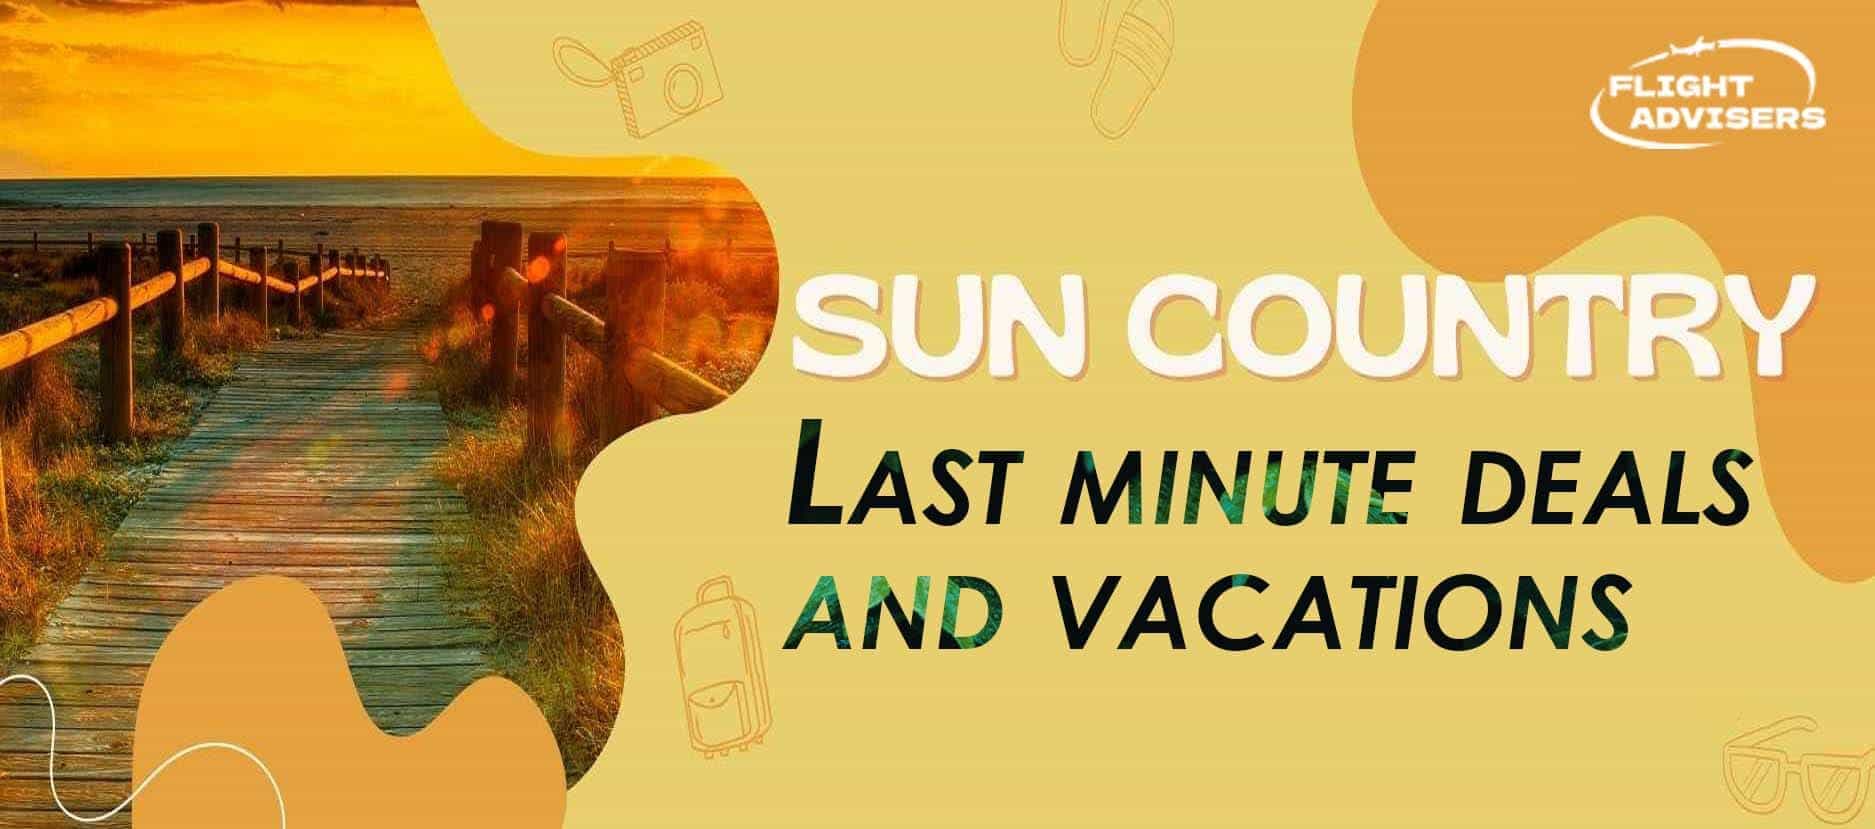 sun-country-last-minute-deals-and-vacations